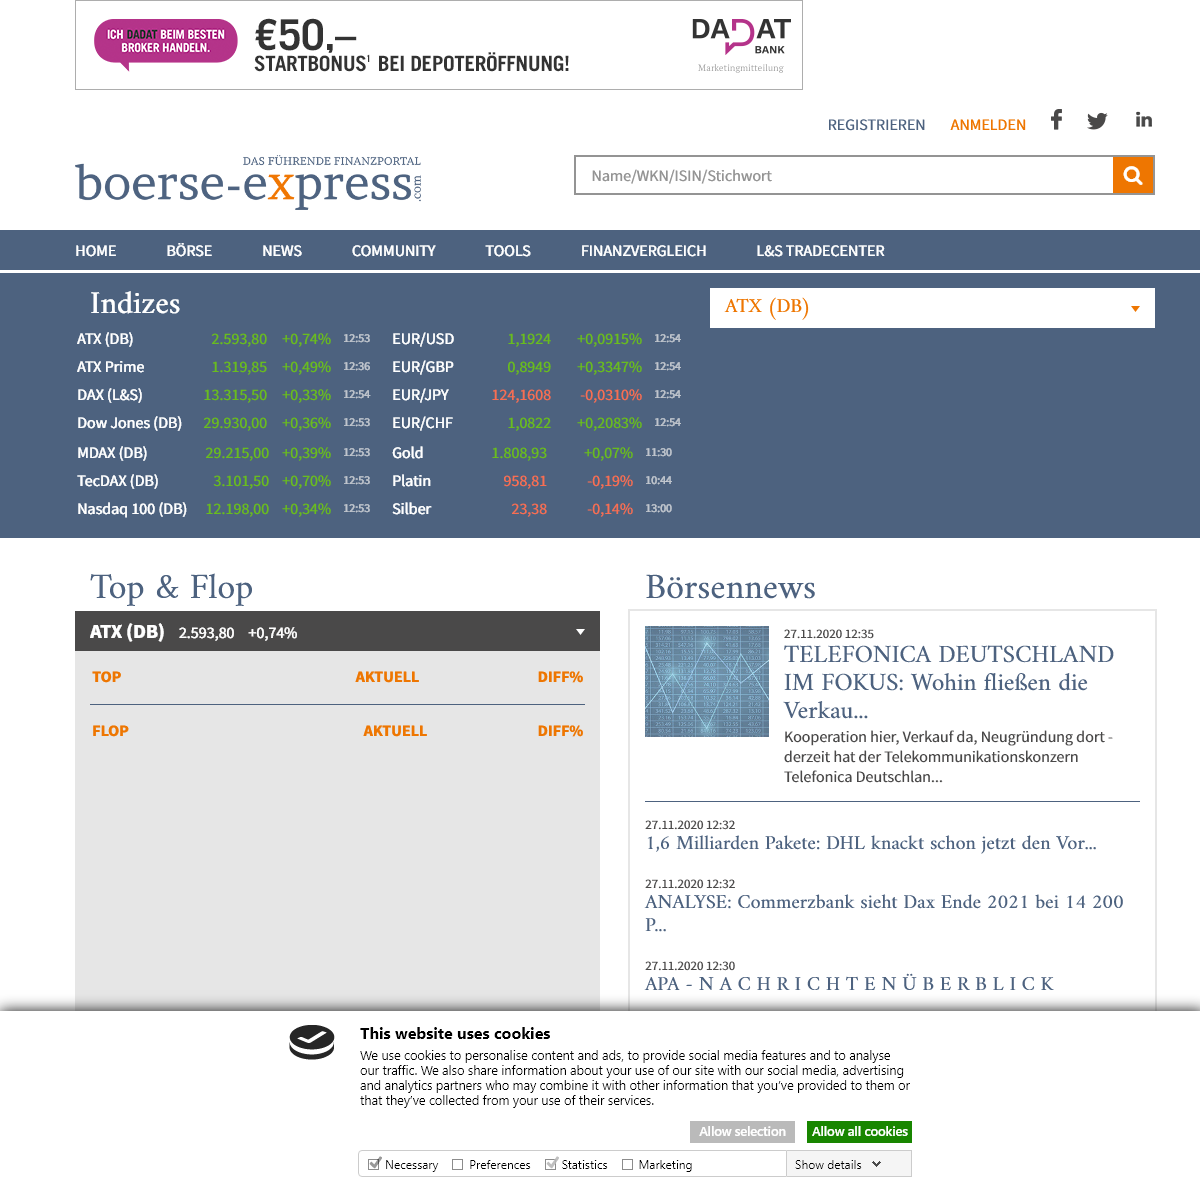 A complete backup of boerse-express.com